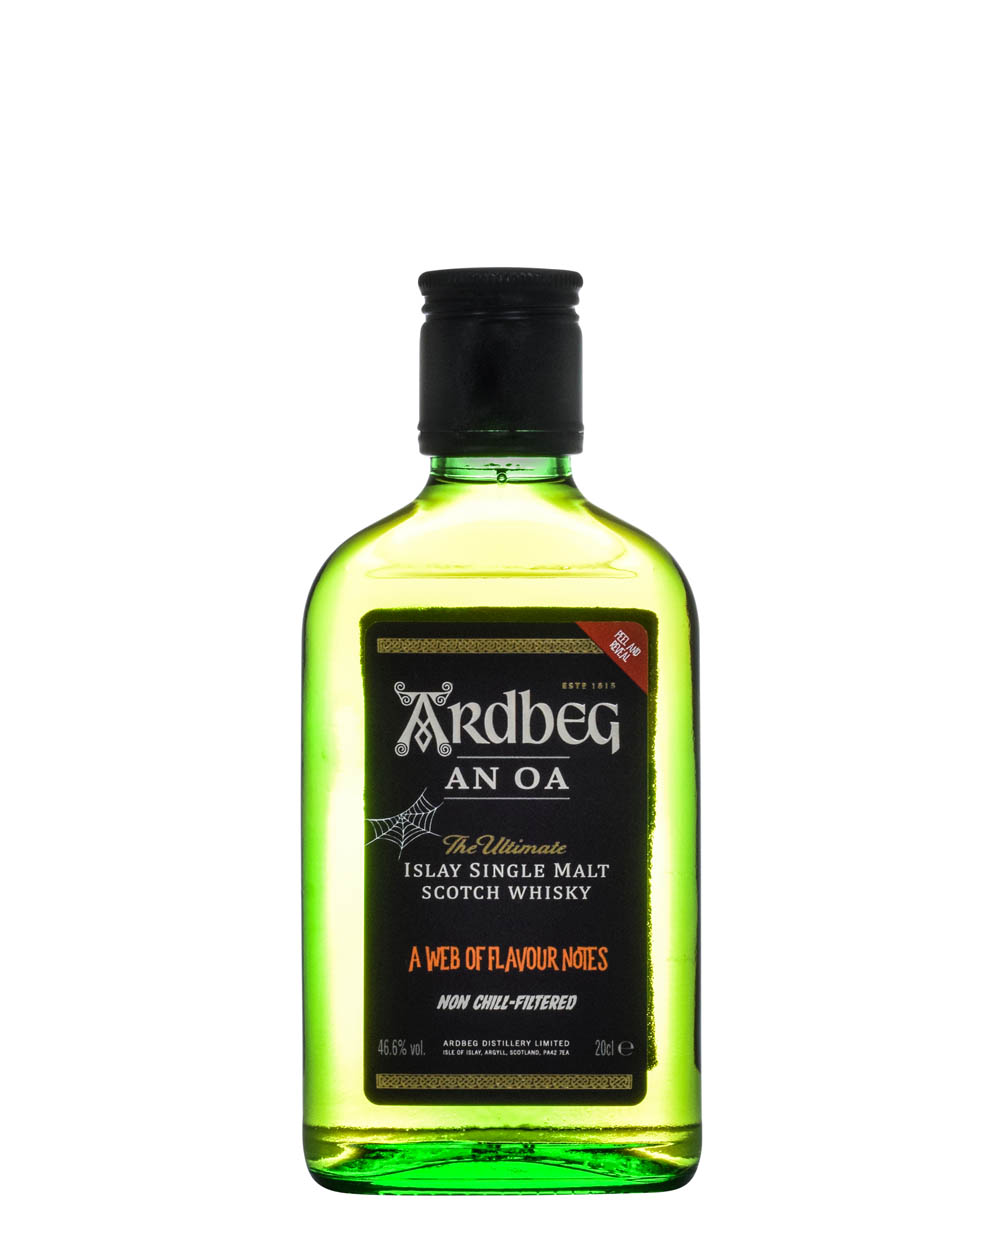 Ardbeg The Three Monsters of Smoke - 3 x 20 cl Whisky